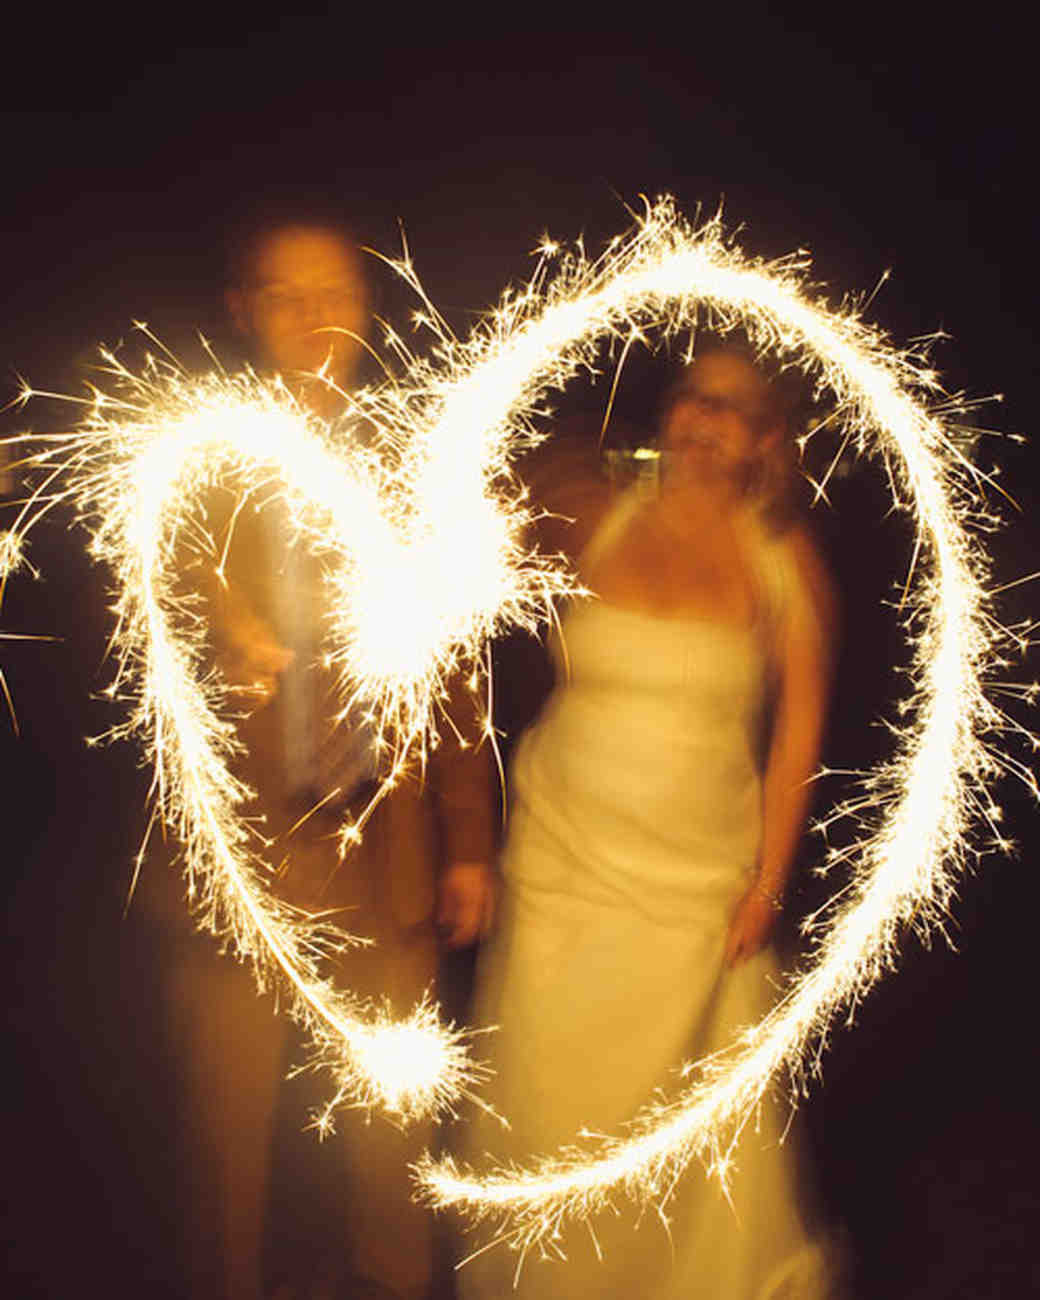 Heart Wedding Sparklers
 Amazing Fireworks and Sparklers from Real Weddings